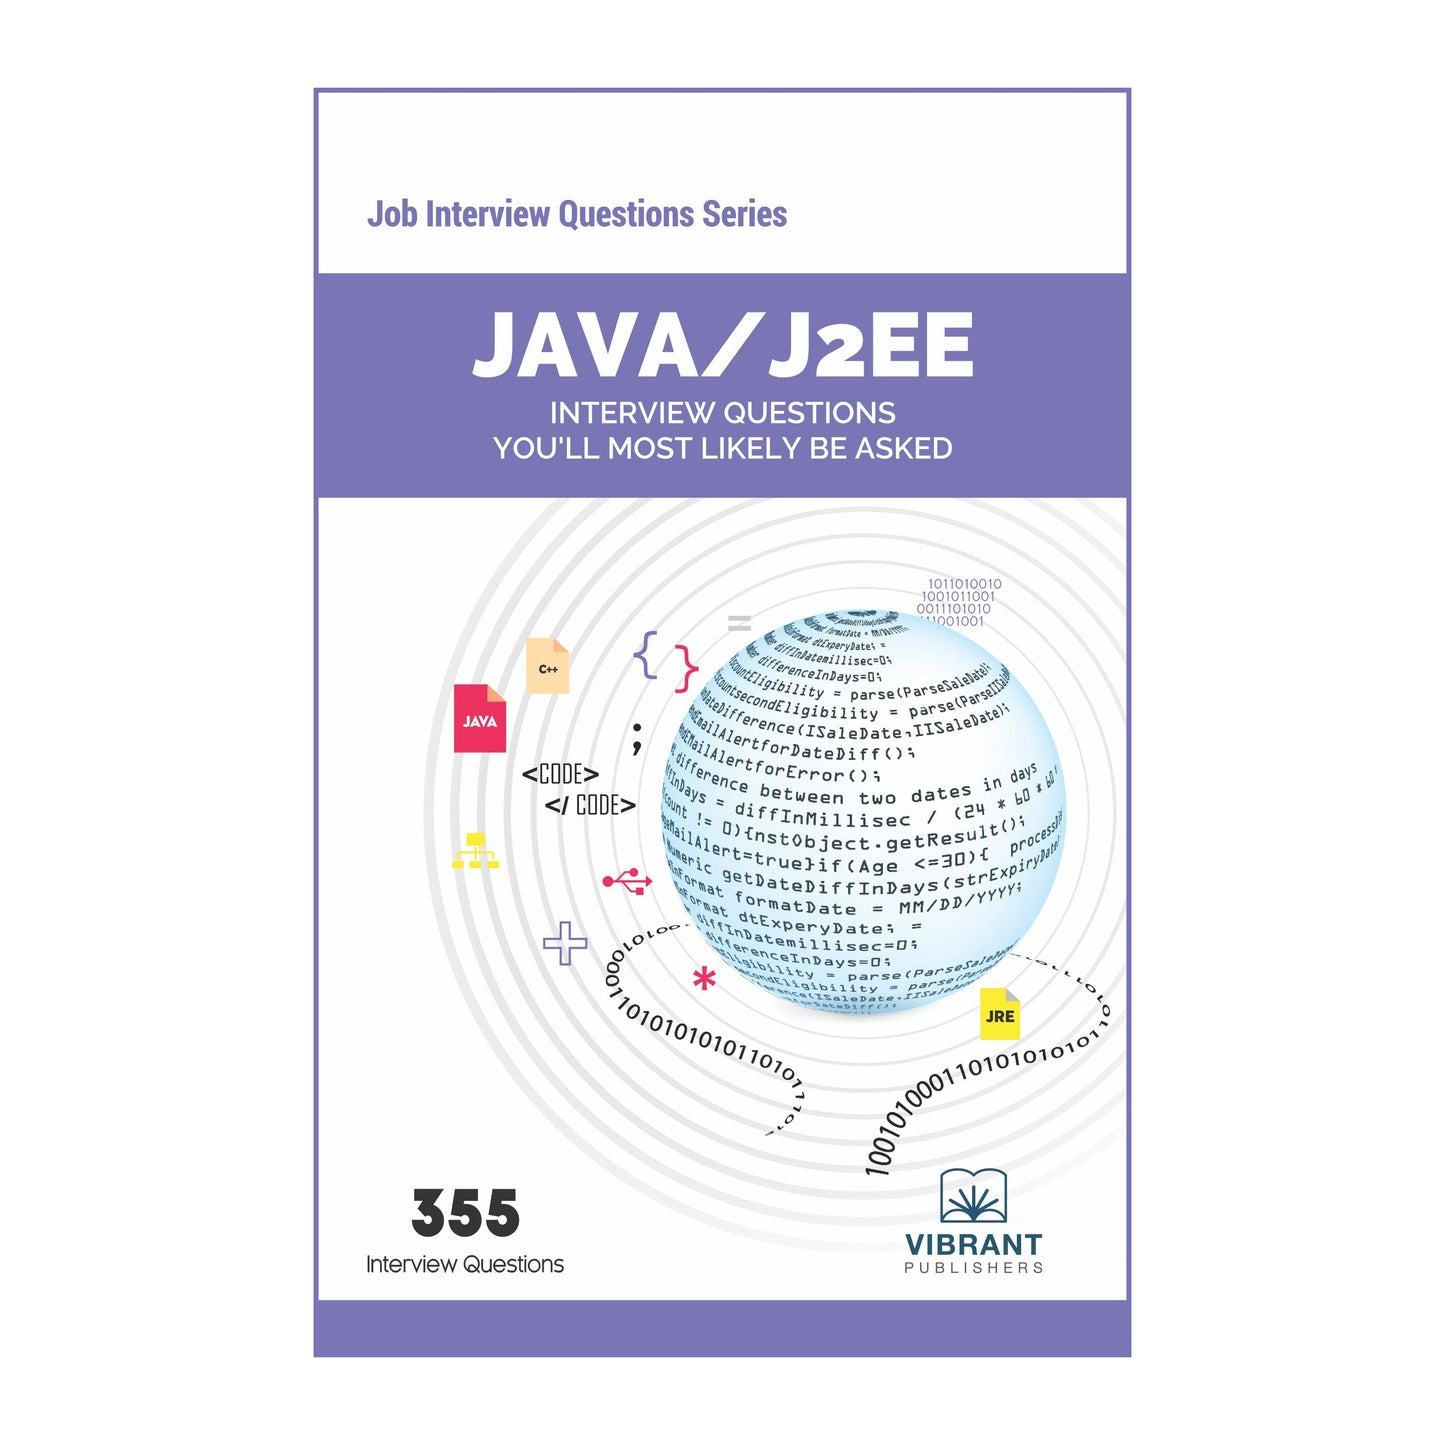 Java/J2EE Interview Questions You’ll Most Likely Be Asked